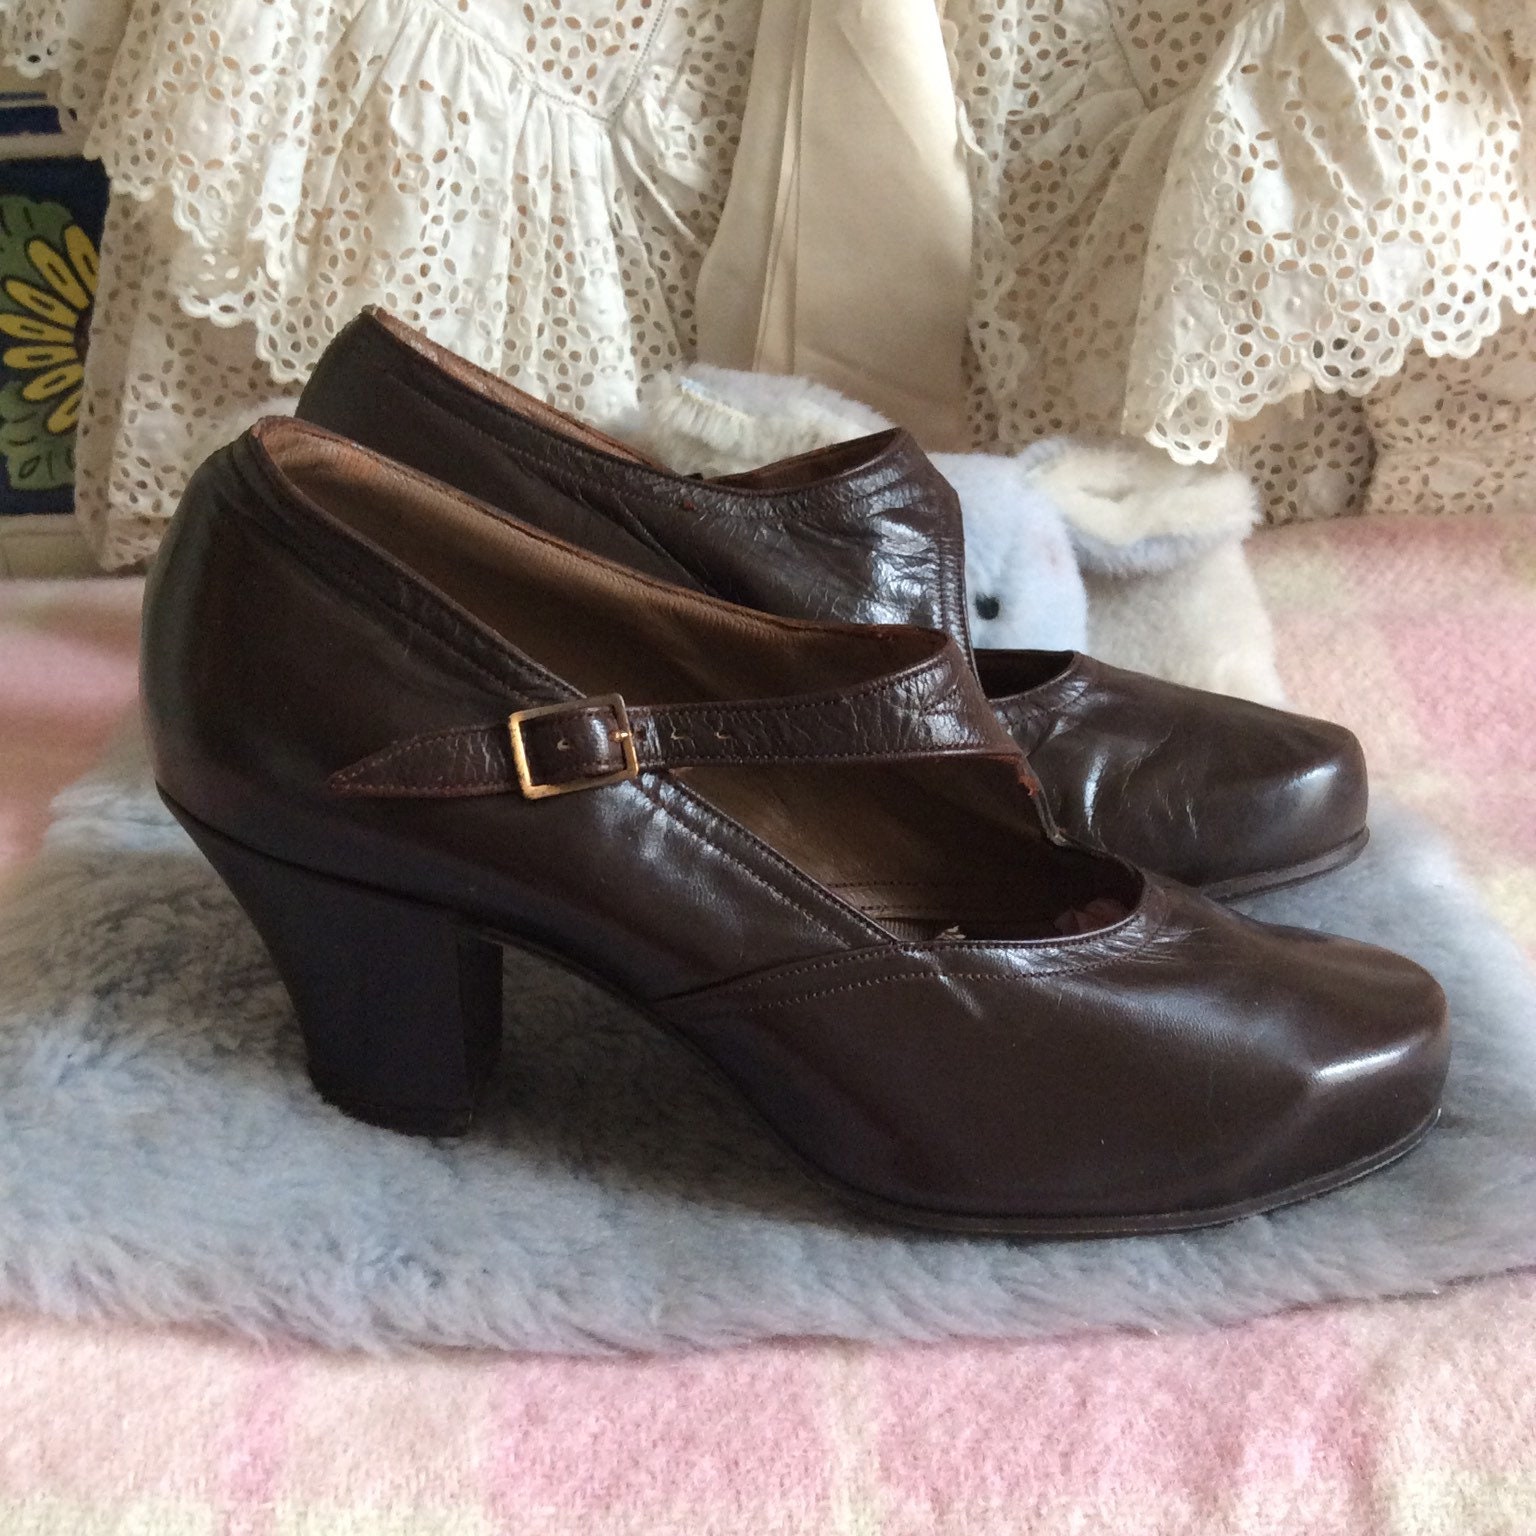 3.5 CC41 utility Mark 1940s brown leather Mary-Jane shoes Shoes Womens Shoes Mary Janes U.K Deadstock 